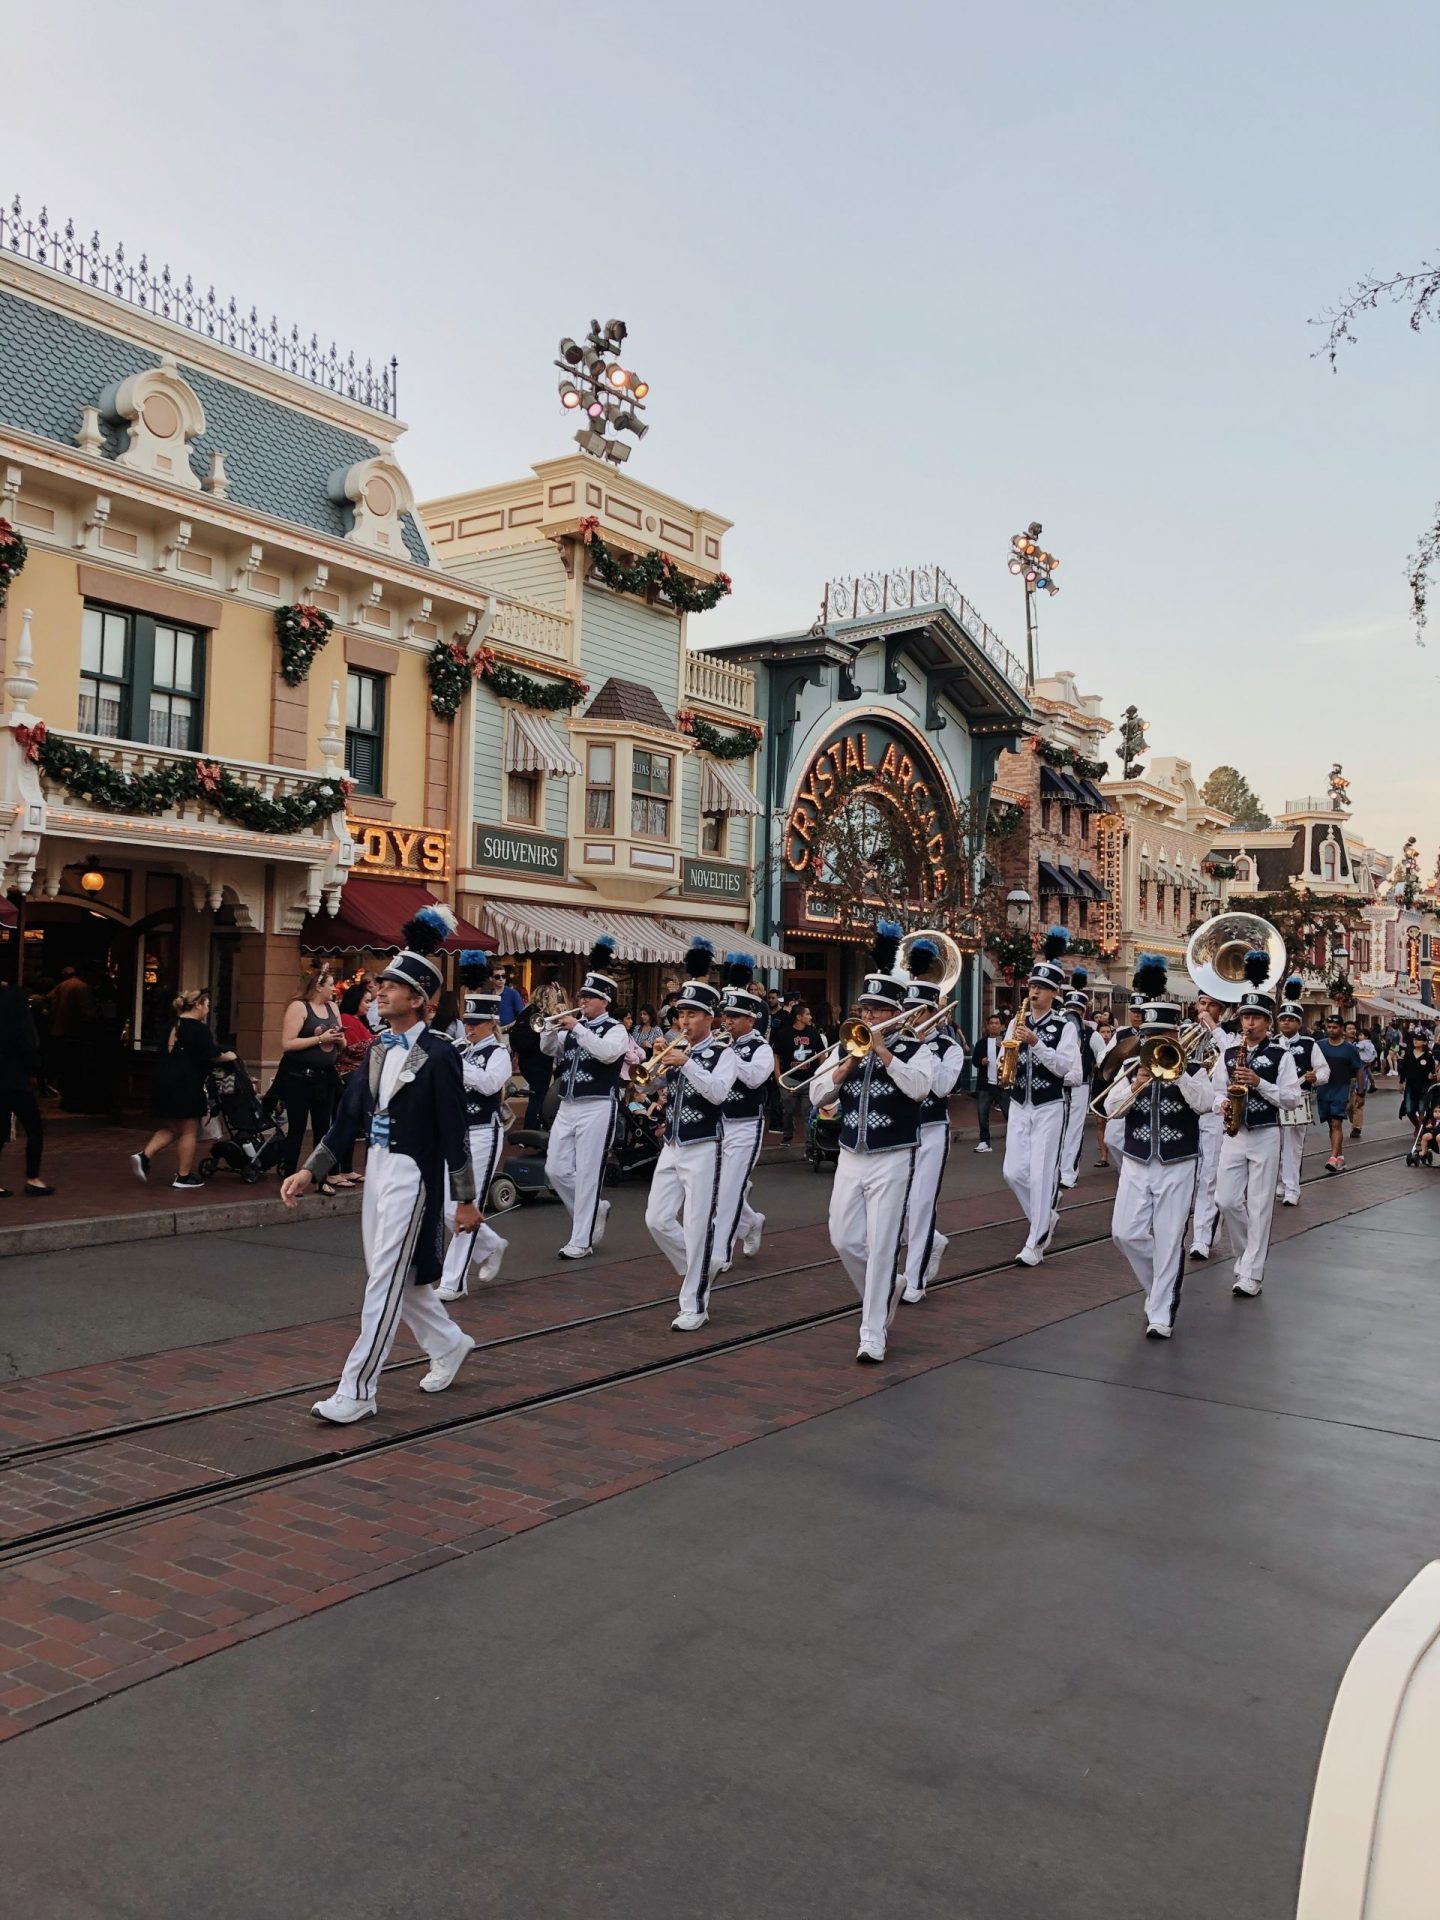 how-to-spend-4-days-in-disneyland